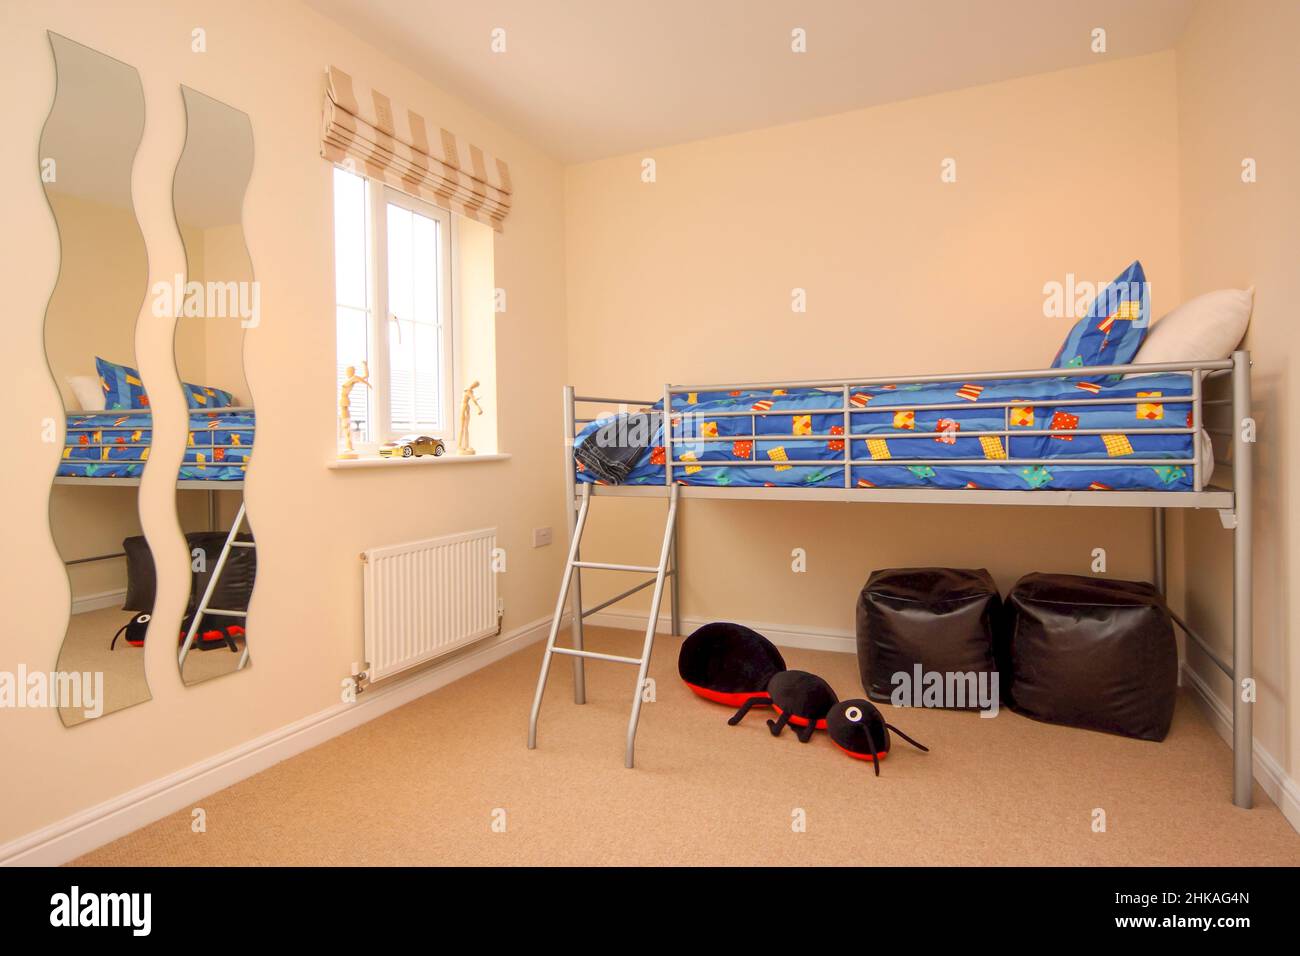 Childs bedroom, raised bed with storage space underneath, bunk bed, bean bags, toy ant. Stock Photo